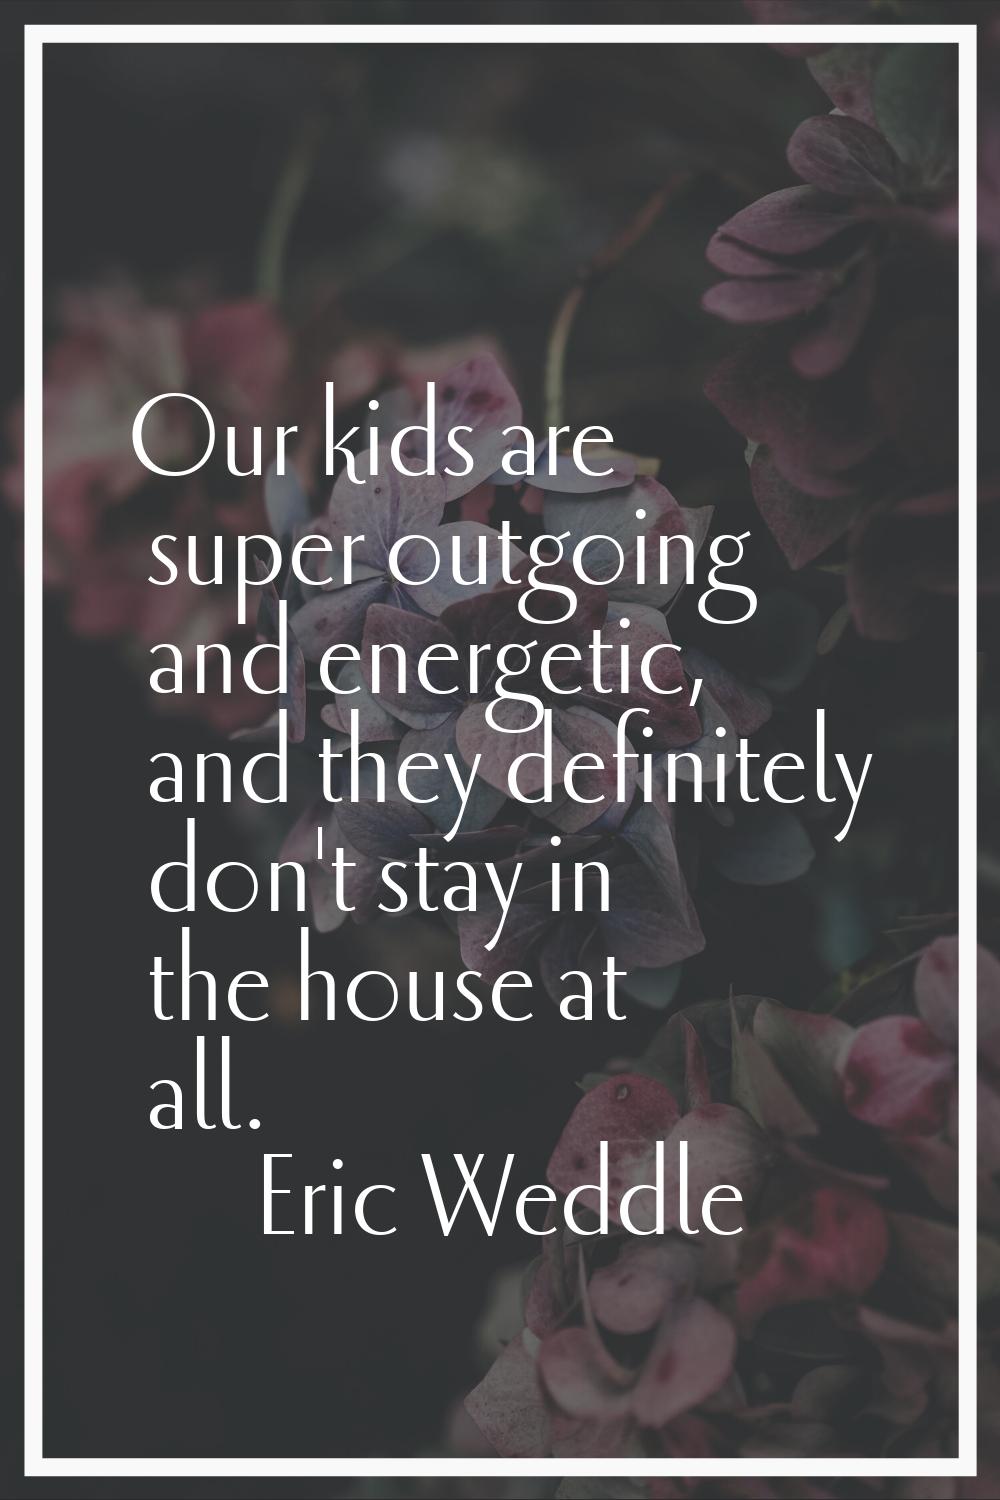 Our kids are super outgoing and energetic, and they definitely don't stay in the house at all.